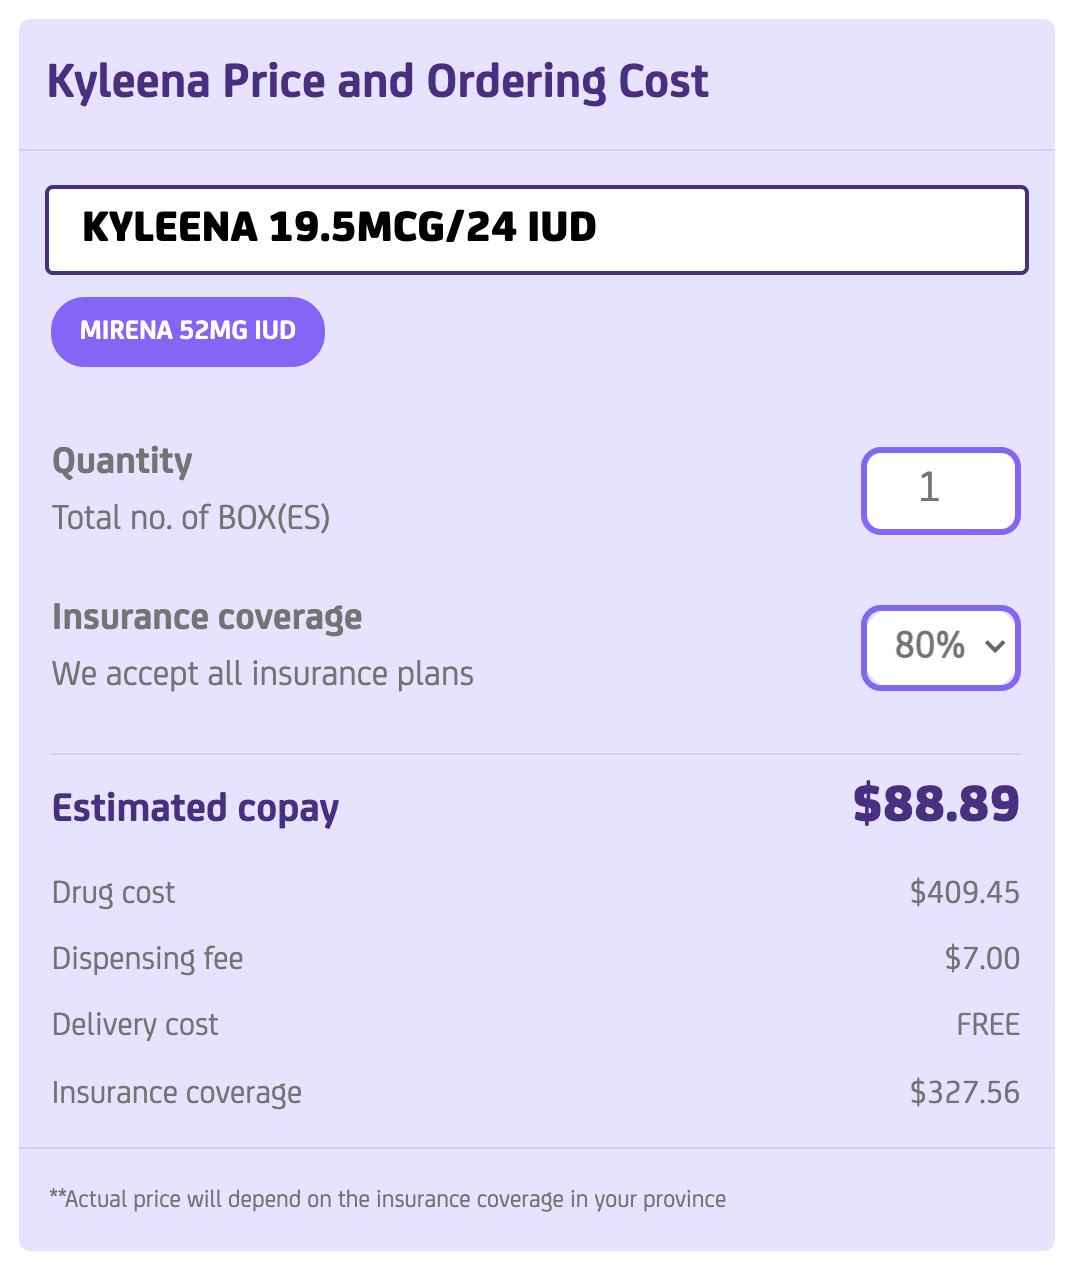 Kylena iud price image in Canada and delivery cost